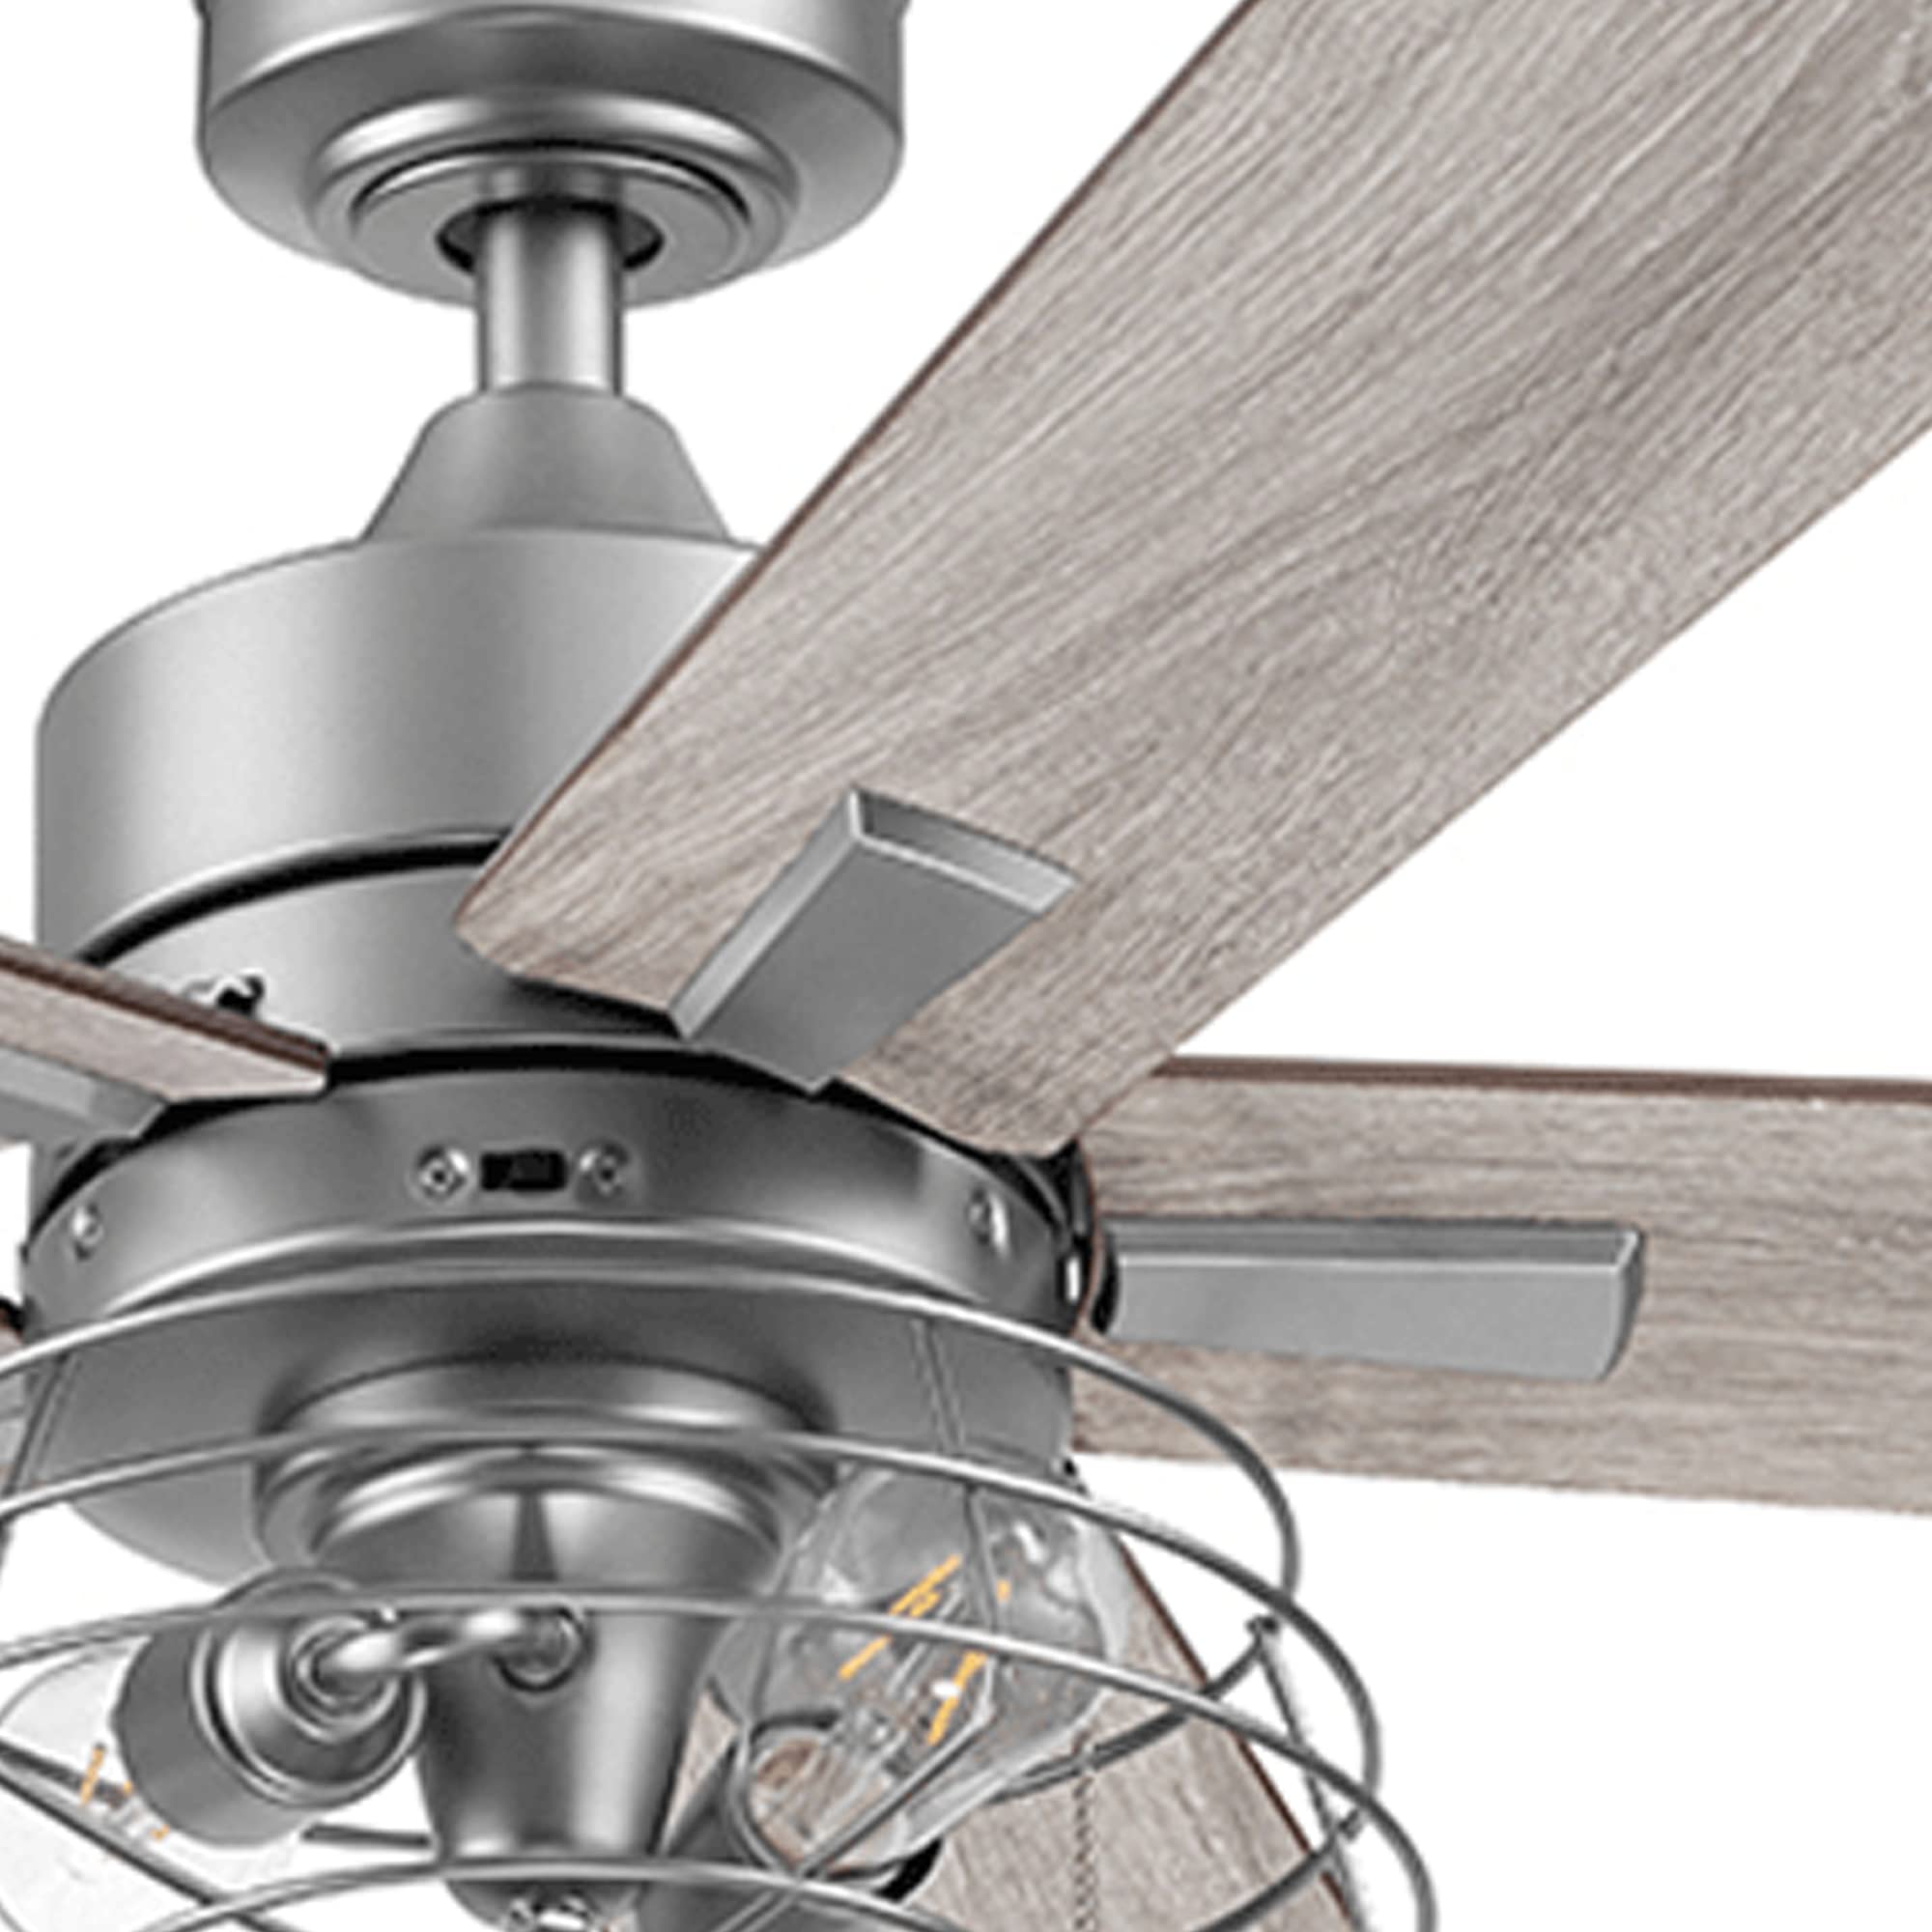 Prominence Home Marshall Ceiling Fan - 52-in Indoor Fan with Pull Chain - LED Ceiling Fan with Light - Industrial Room Fan with Dual Finish Blades - Remote Compatible - Model 51458-01 (Pewter)